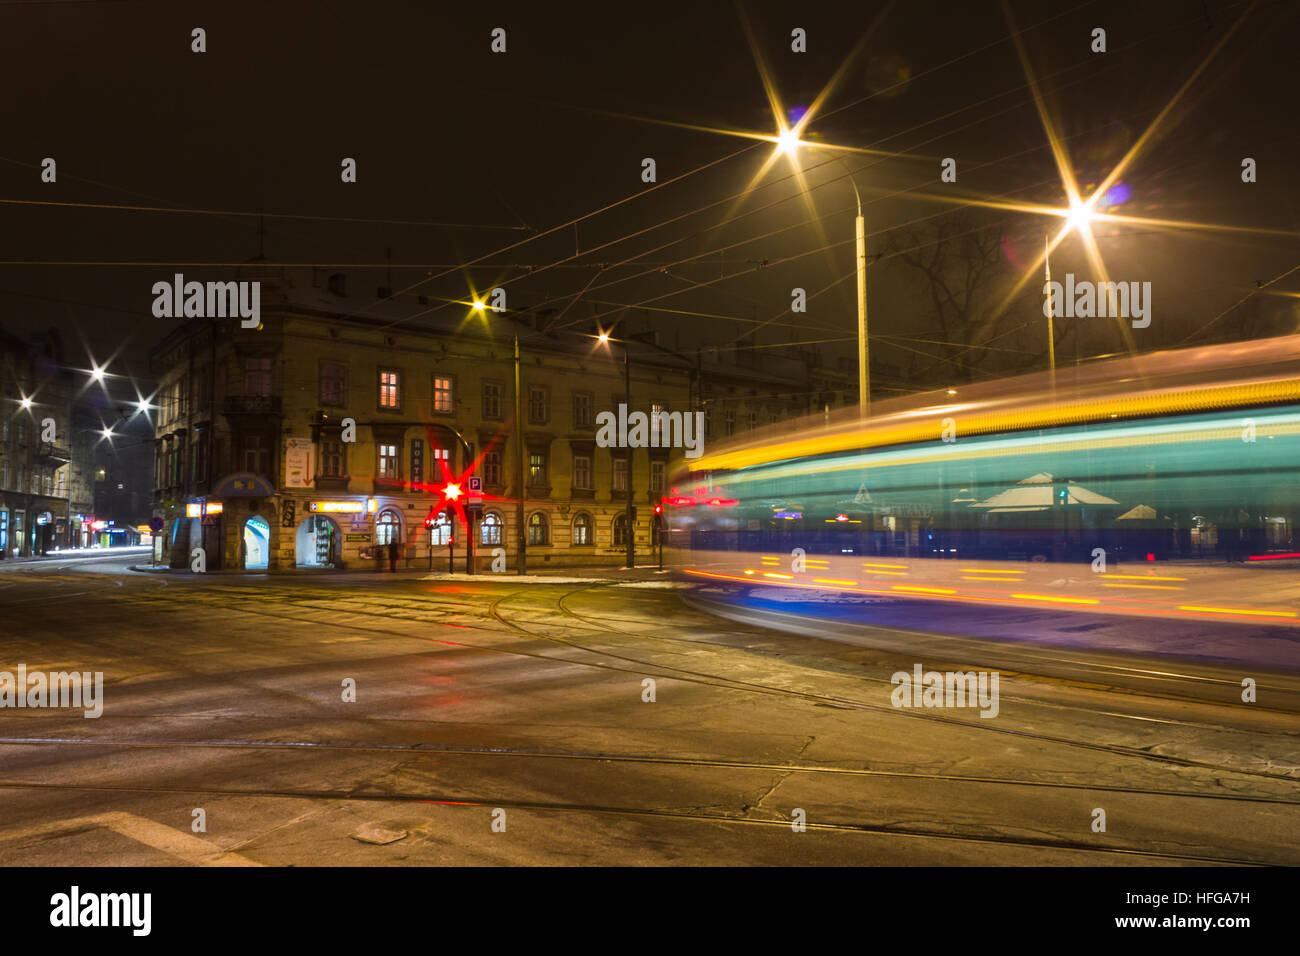 One of the city's trams captured at night. Stock Photo